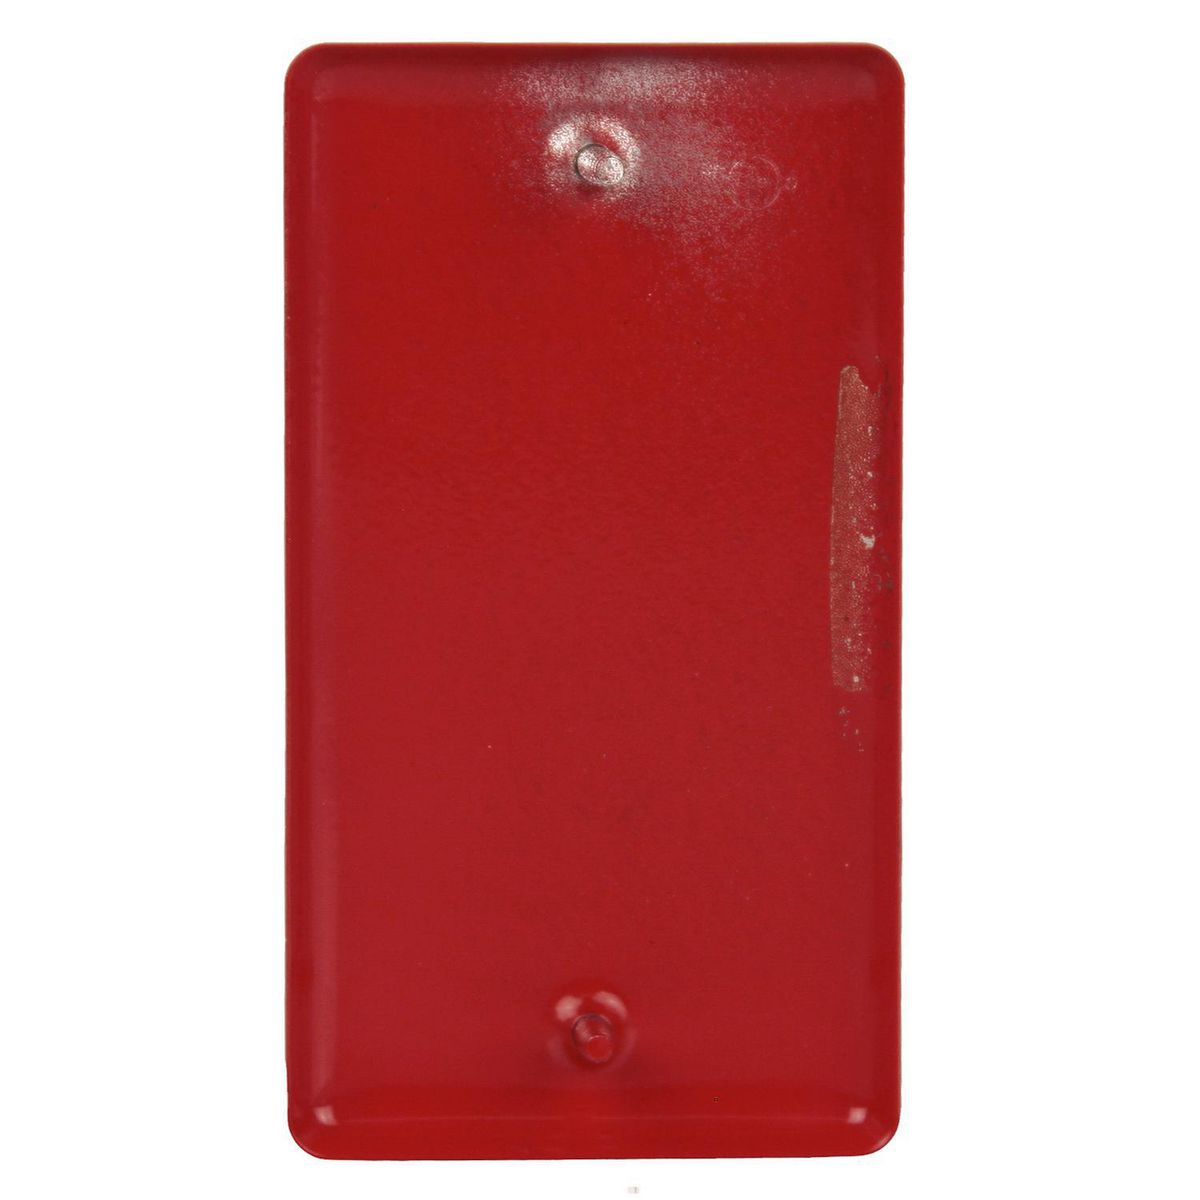 HANDY BOX COVER - BLANK RED